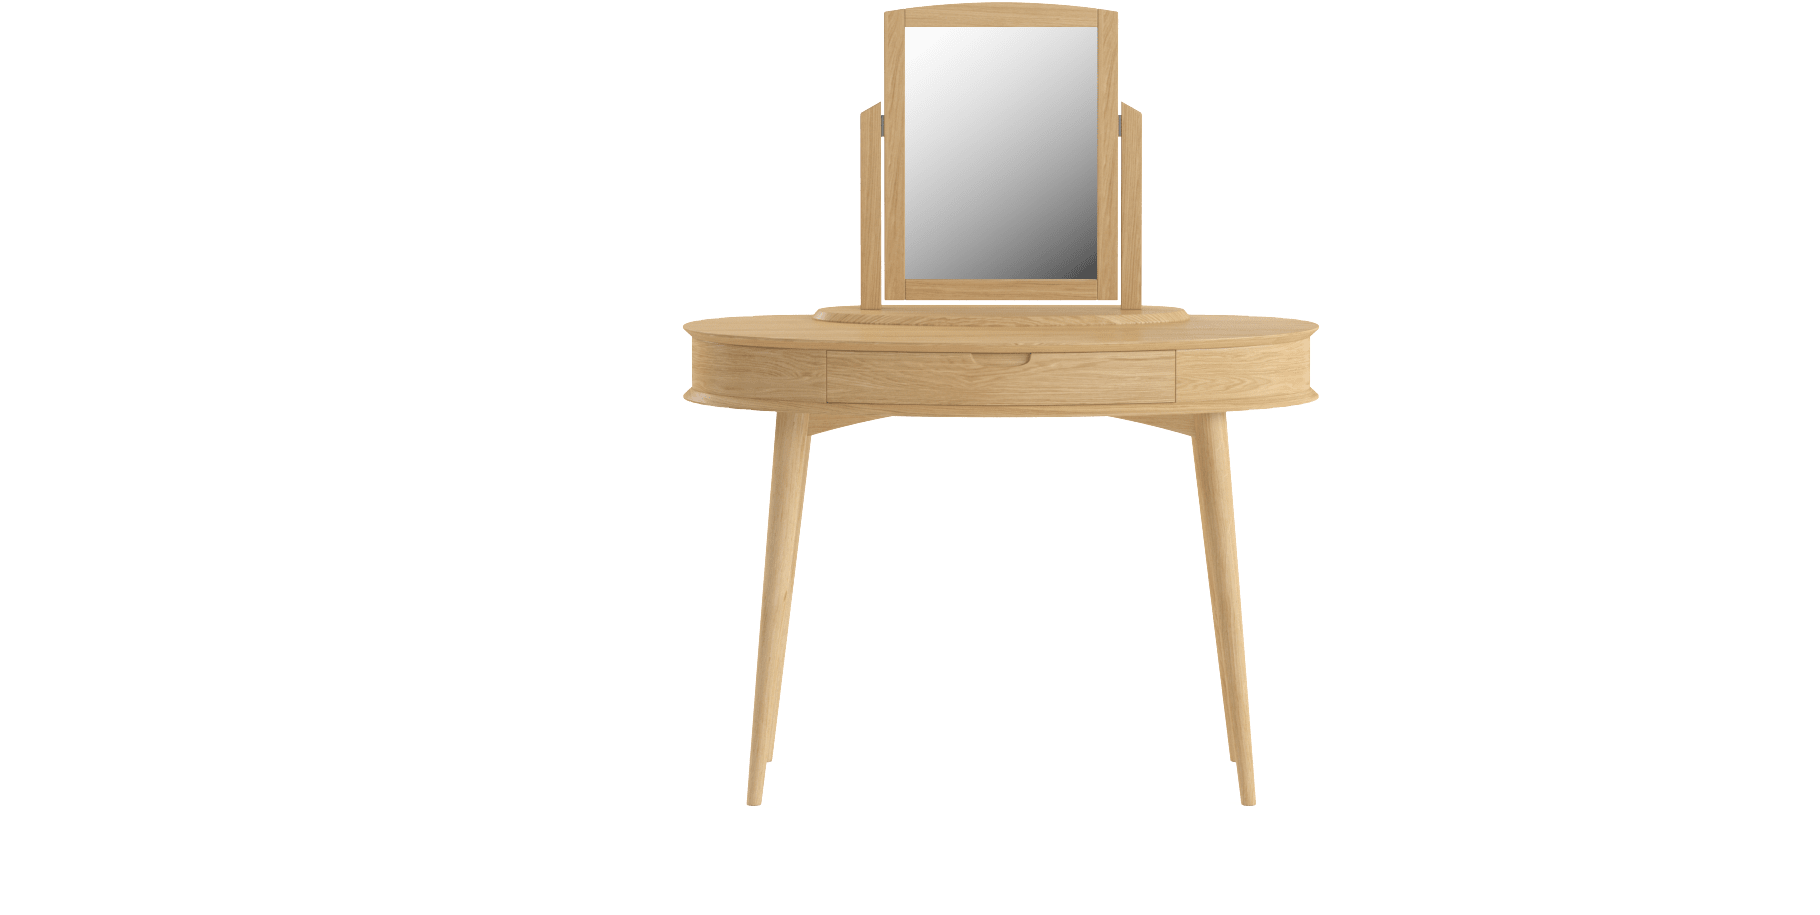 Modern Wooden Dressing Tablewith Mirror PNG image